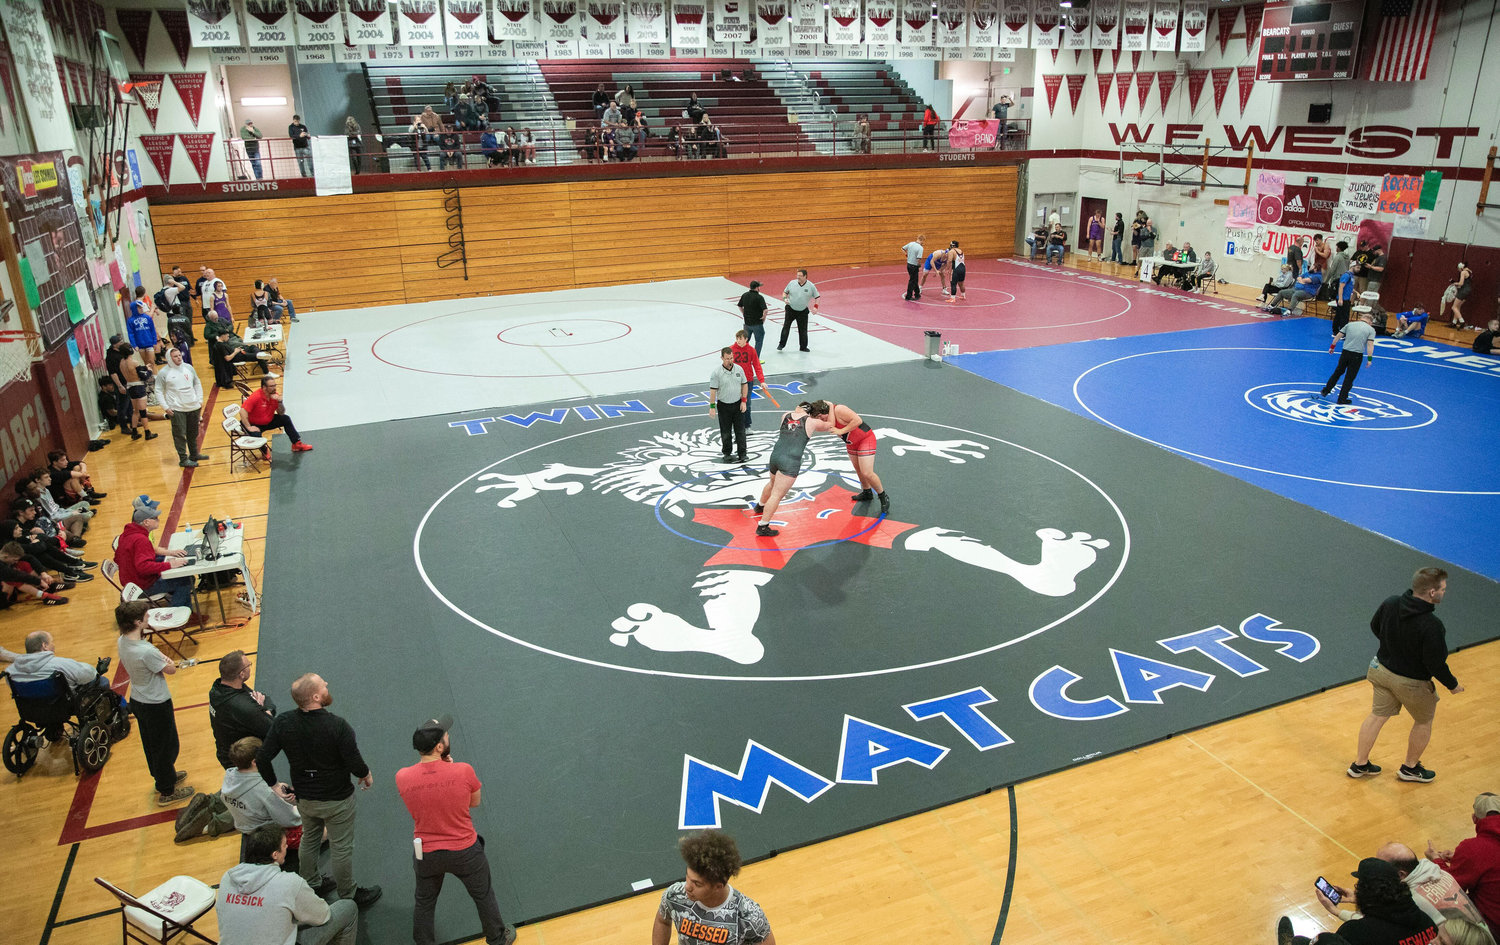 Athletes wrestle during the Bearcat Invitational on Saturday at W.F. West High School in Chehalis.